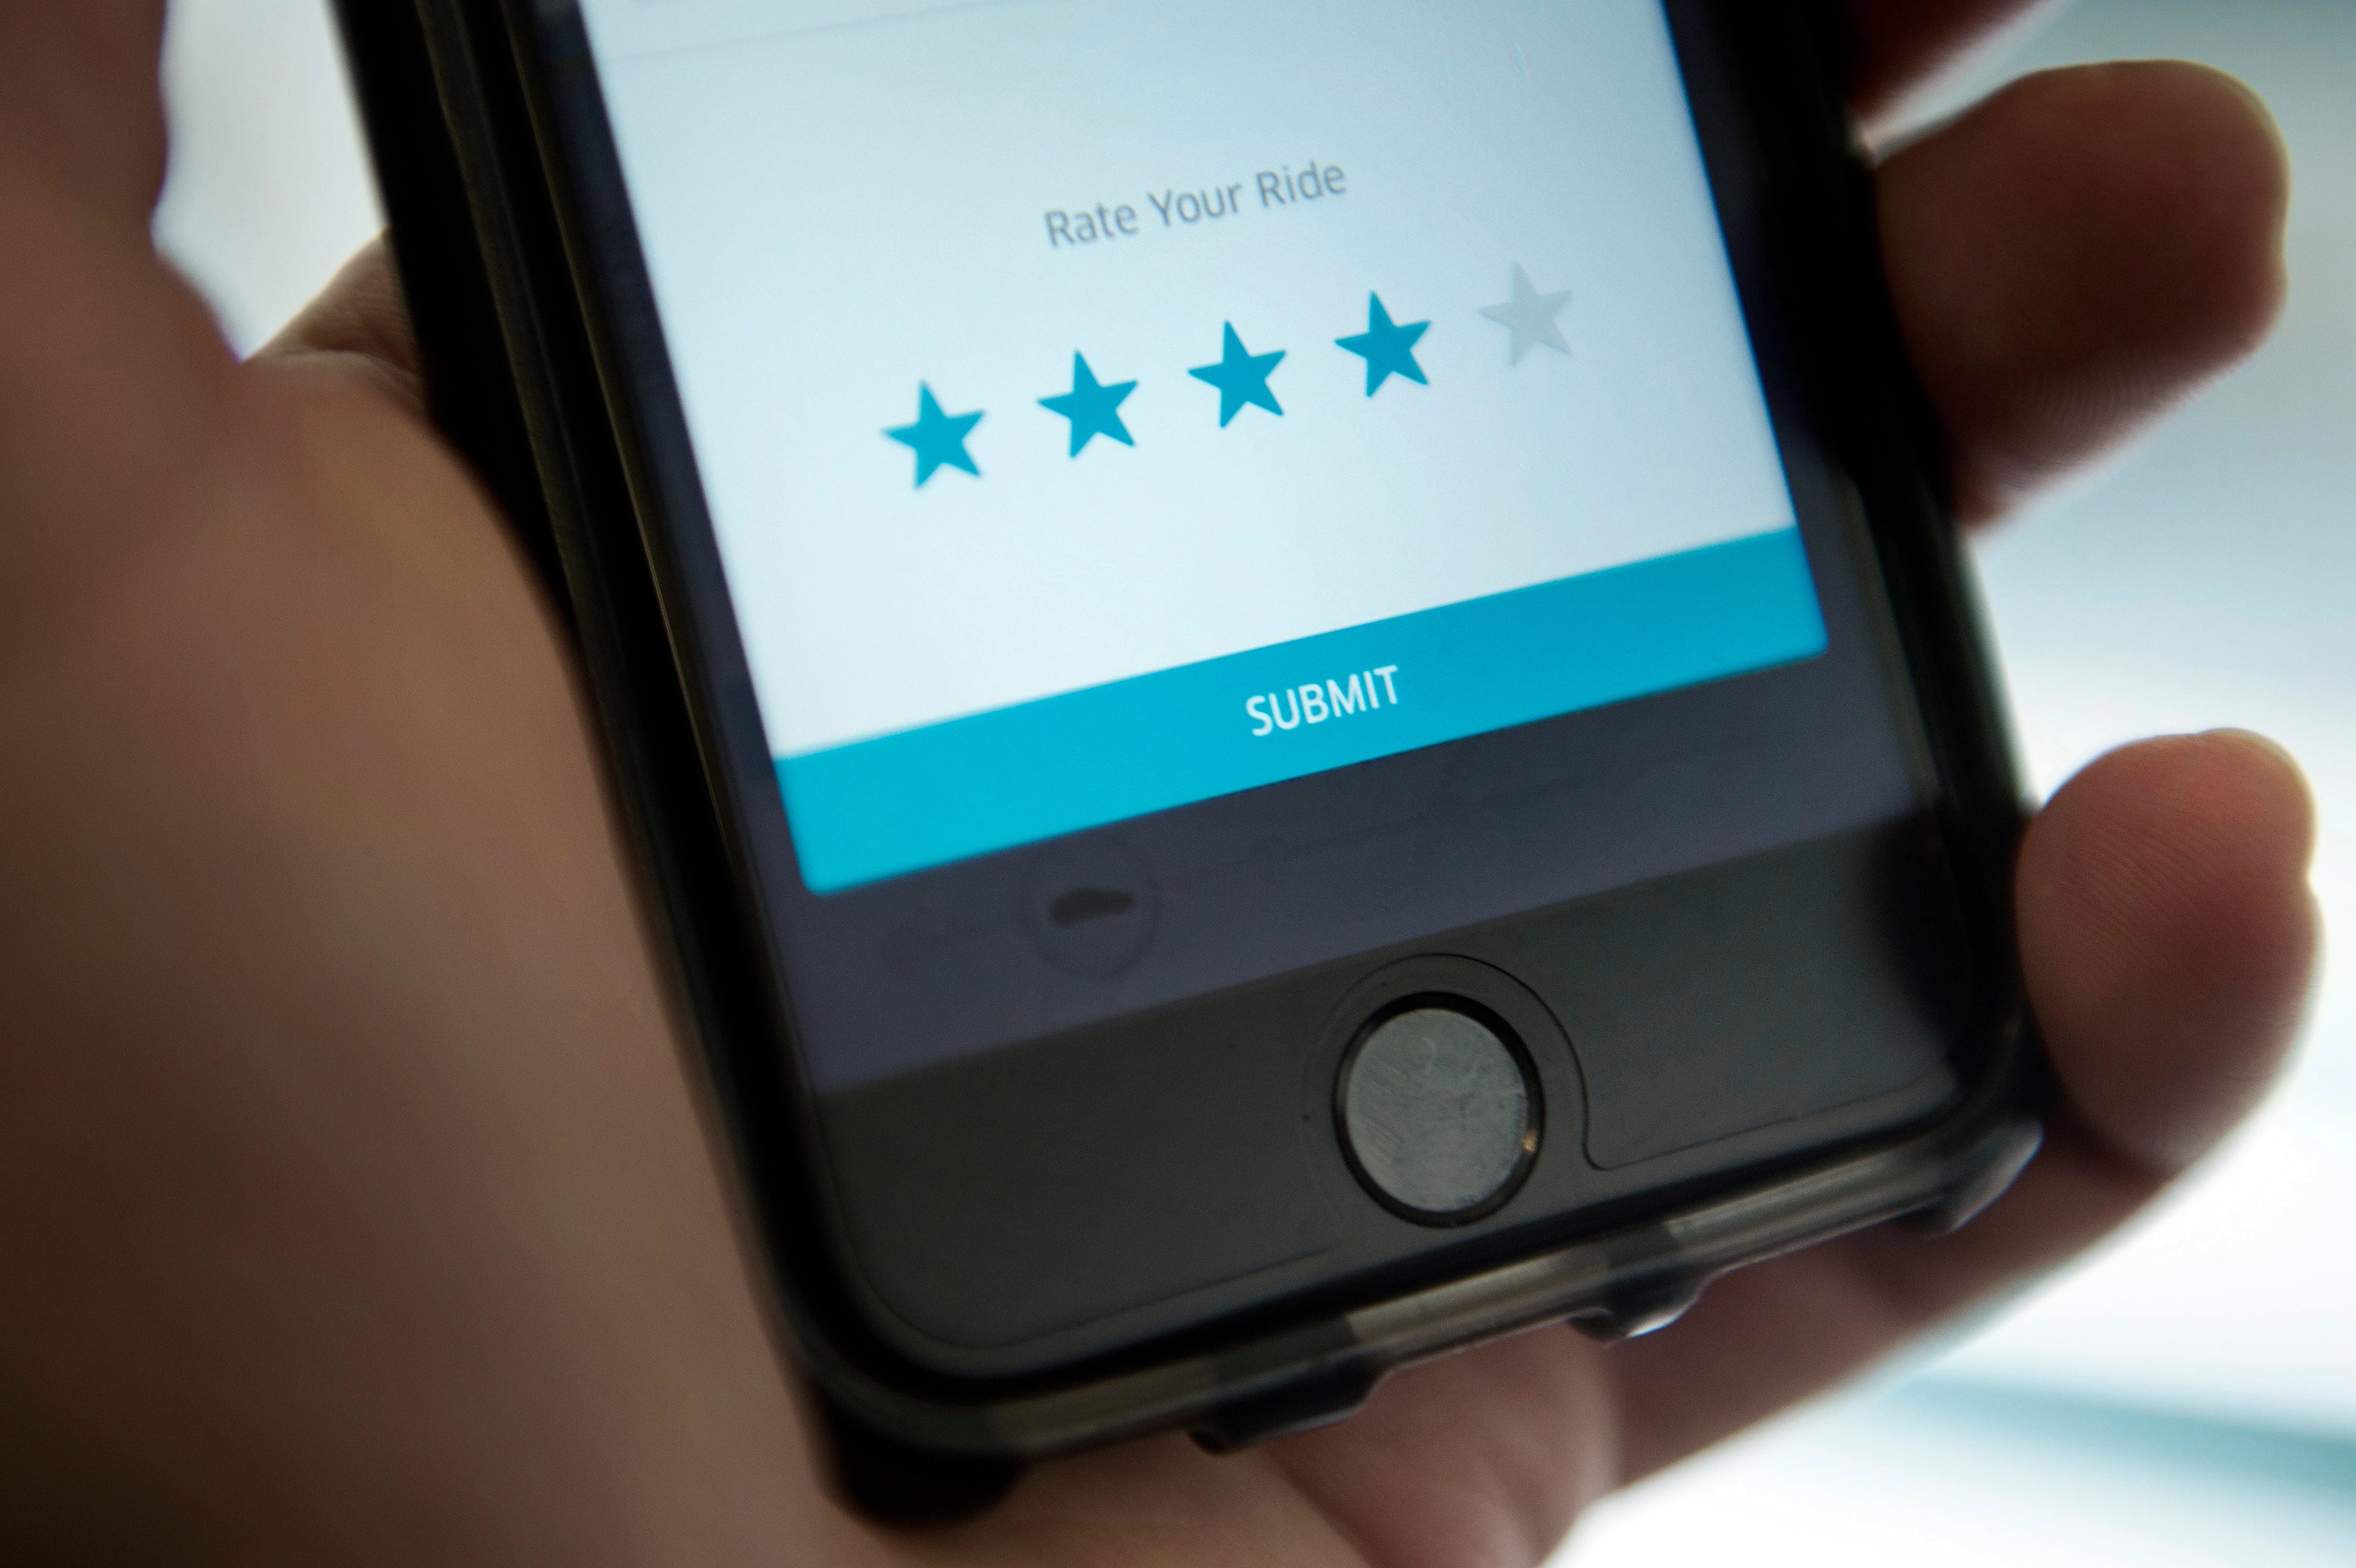 The driver rating screen in an Uber app is seen February 12, 2016 in Washington, DC. Global ridesharing service Uber said February 12, 2016 it had raised $200 million in additional funding to help its push into emerging markets.The latest round comes from Luxembourg-based investment group LetterOne (L1), according to a joint statement.  / AFP PHOTO / Brendan Smialowski        (Photo credit should read BRENDAN SMIALOWSKI/AFP via Getty Images)